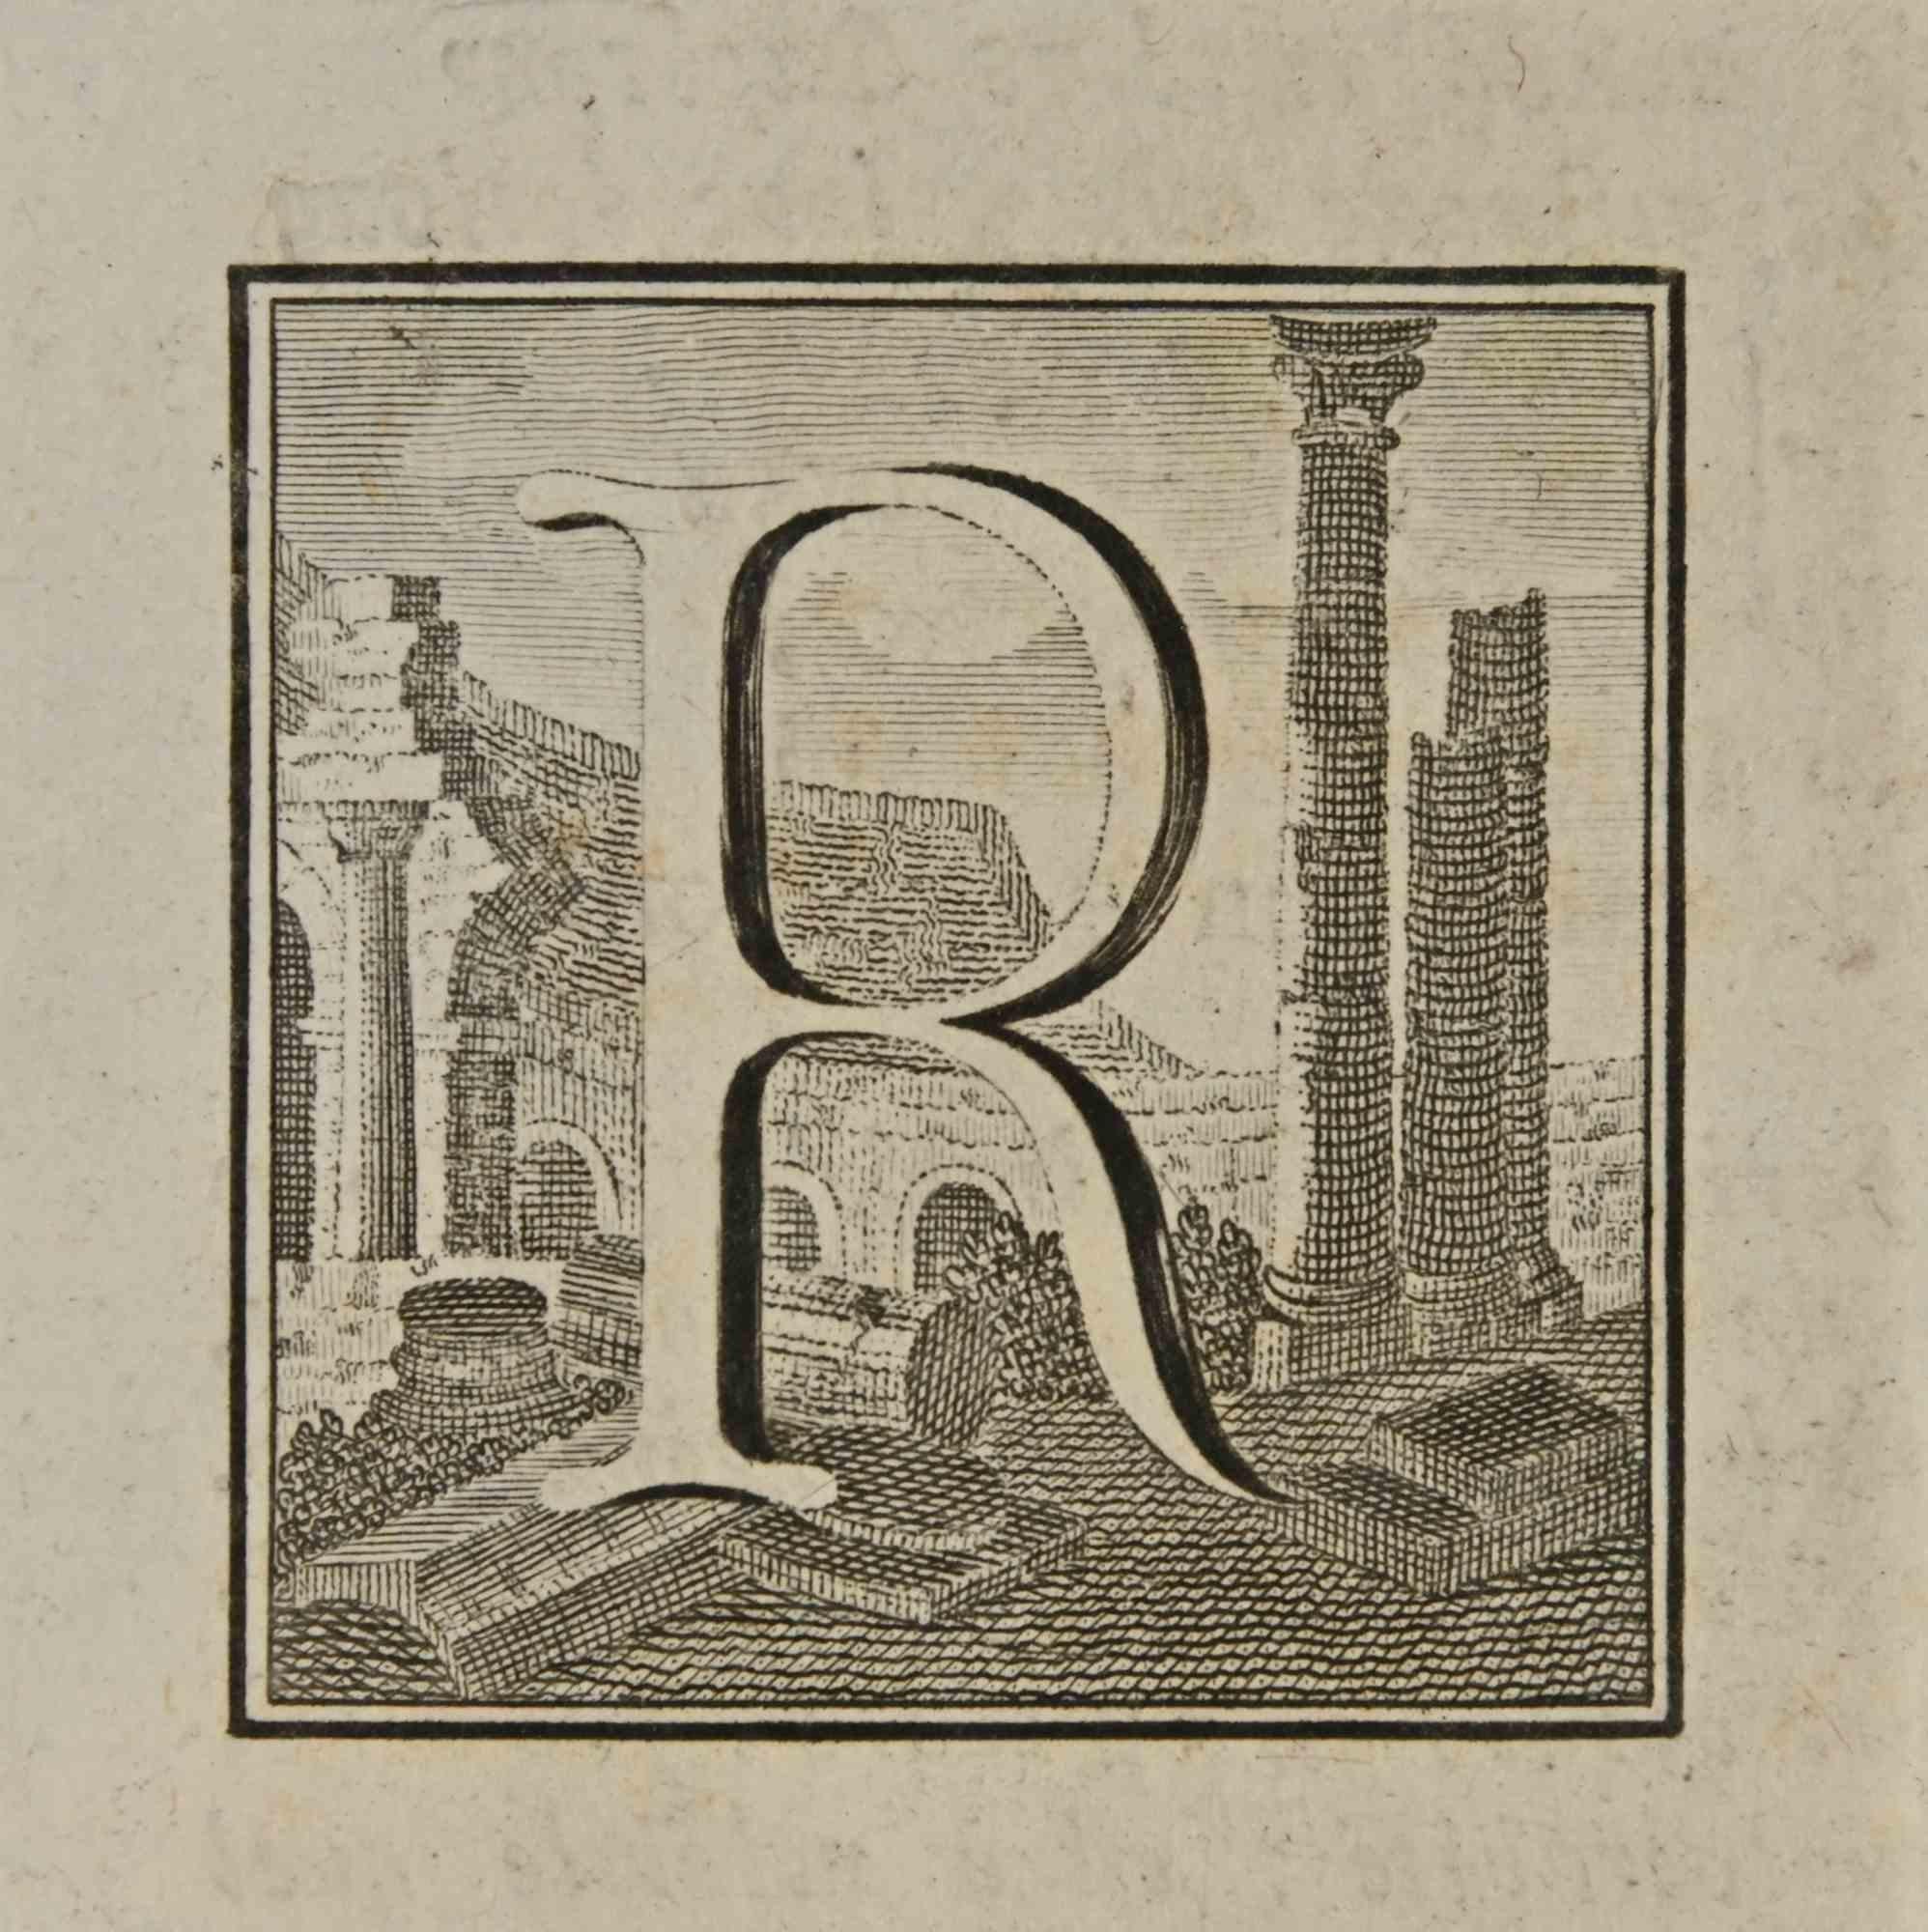 Letter of the Alphabet R,  from the series "Antiquities of Herculaneum", is an etching on paper realized by Luigi Vanvitelli in the 18th century.

Good conditions.

The etching belongs to the print suite “Antiquities of Herculaneum Exposed”